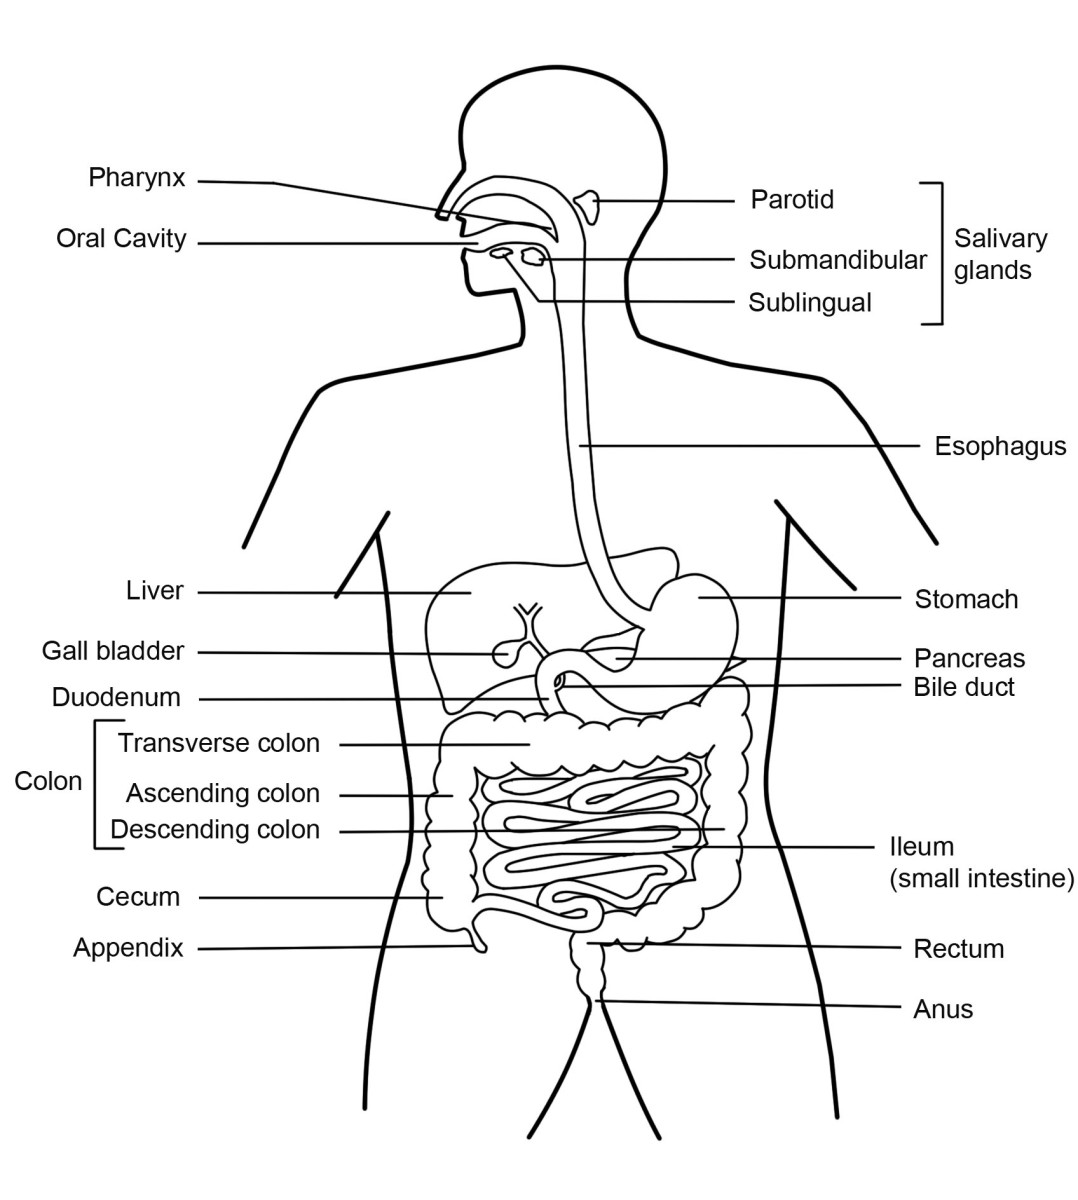 Function of the Digestive System | HubPages